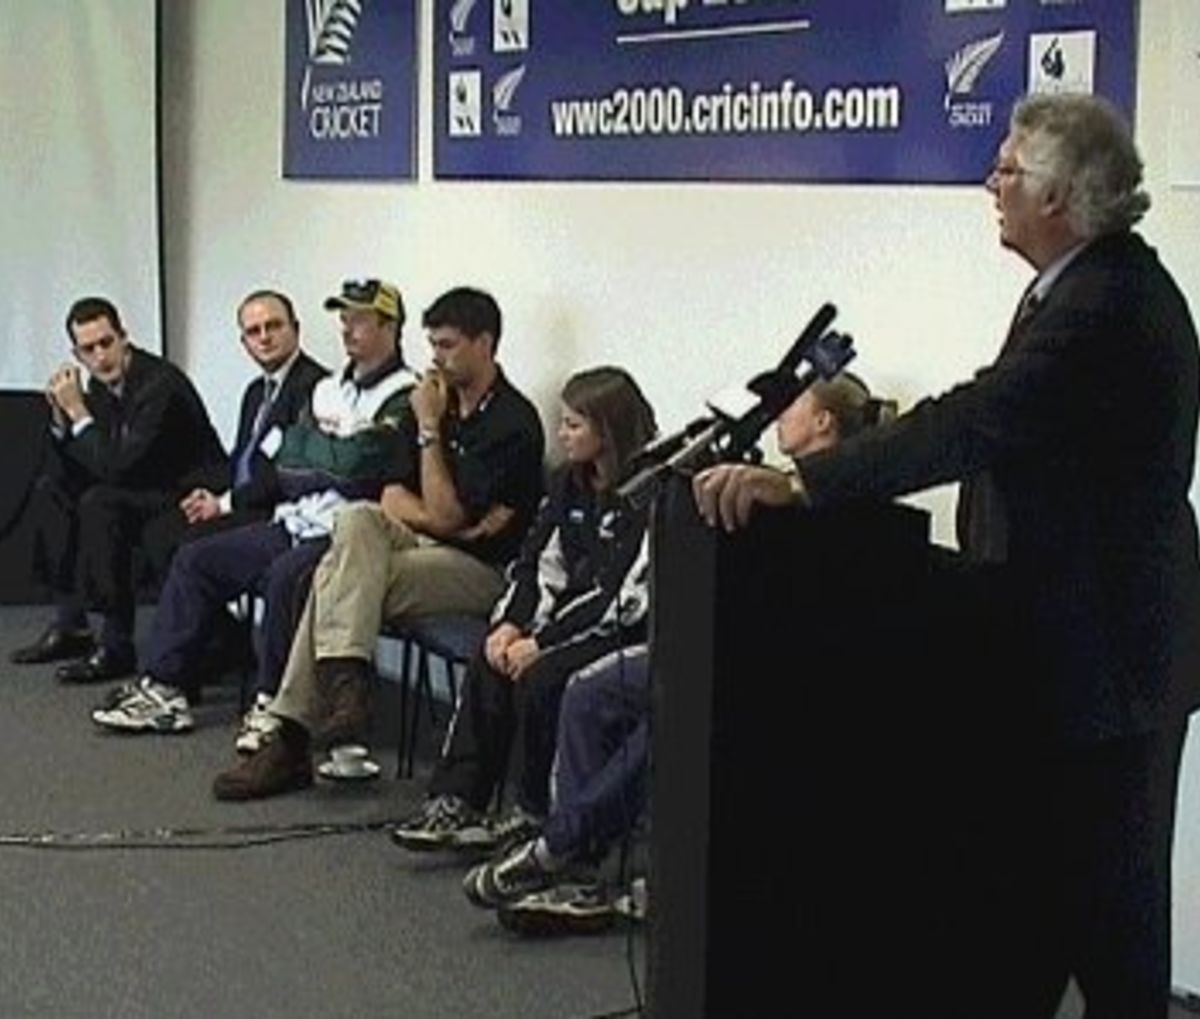 15 February 2000, NZC Chief Executive Christopher Doig addresses the assembled media